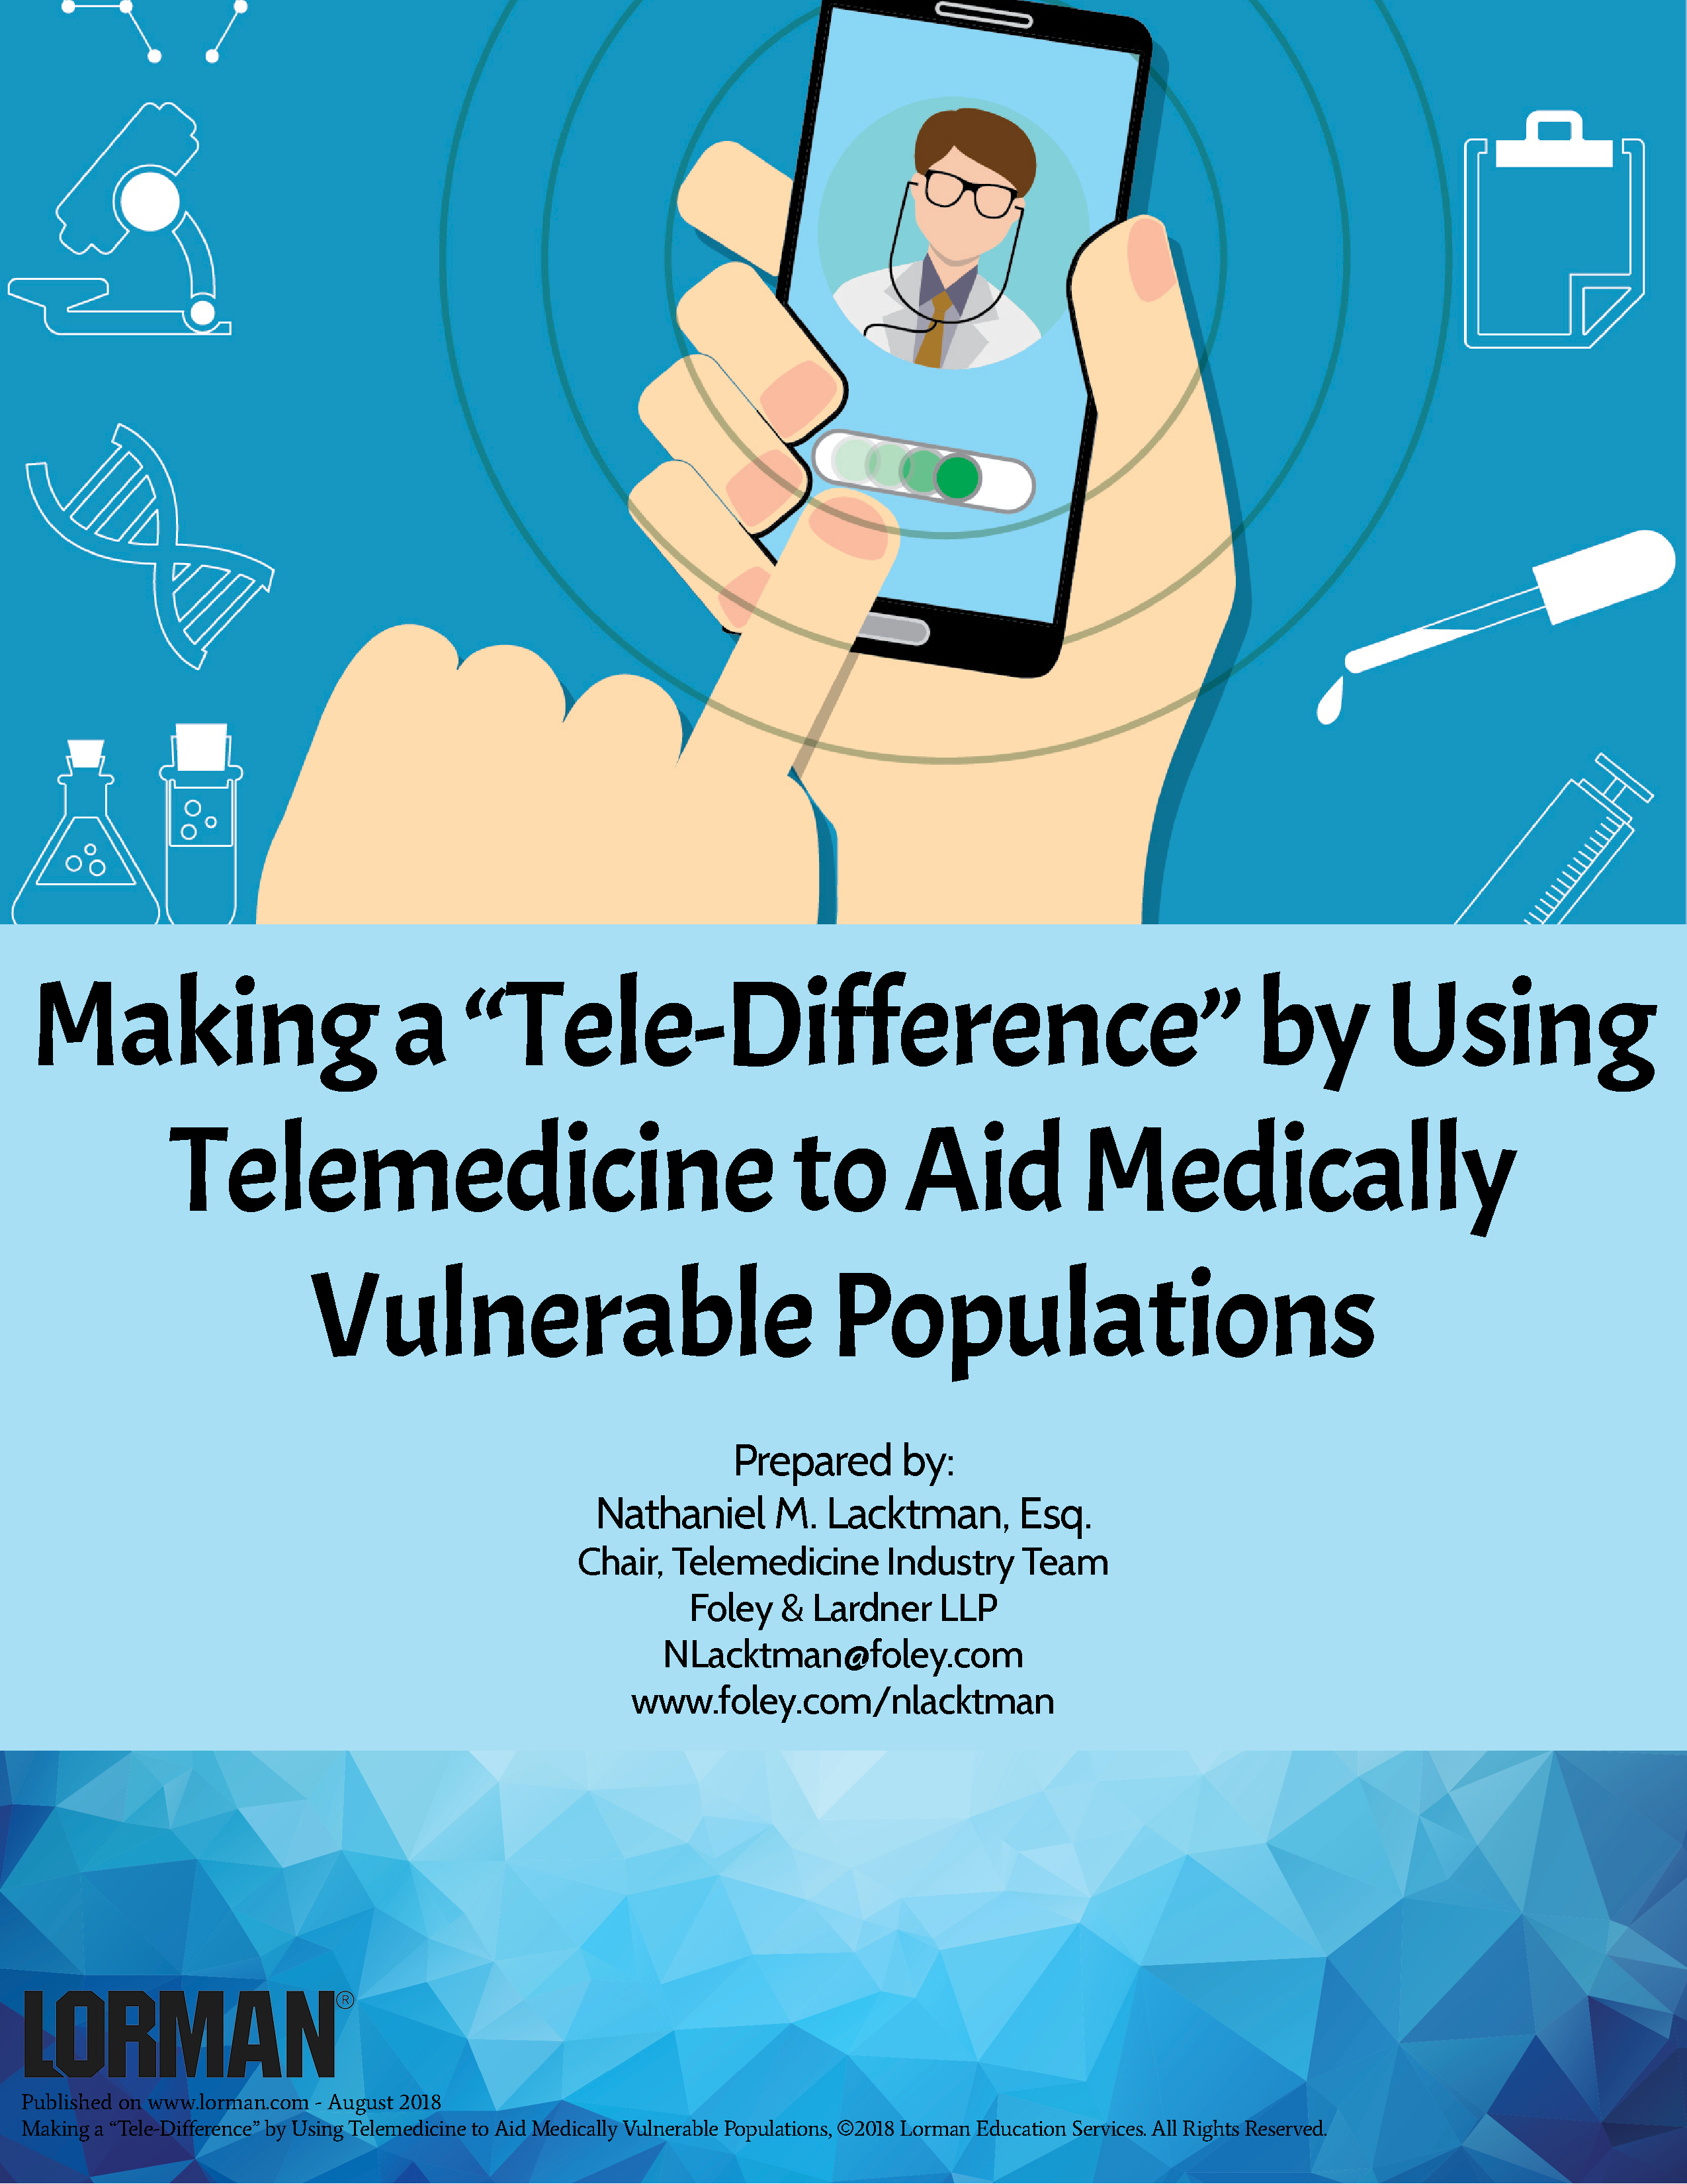 Making a “Tele-Difference” by Using Telemedicine to Aid Medically Vulnerable Populations